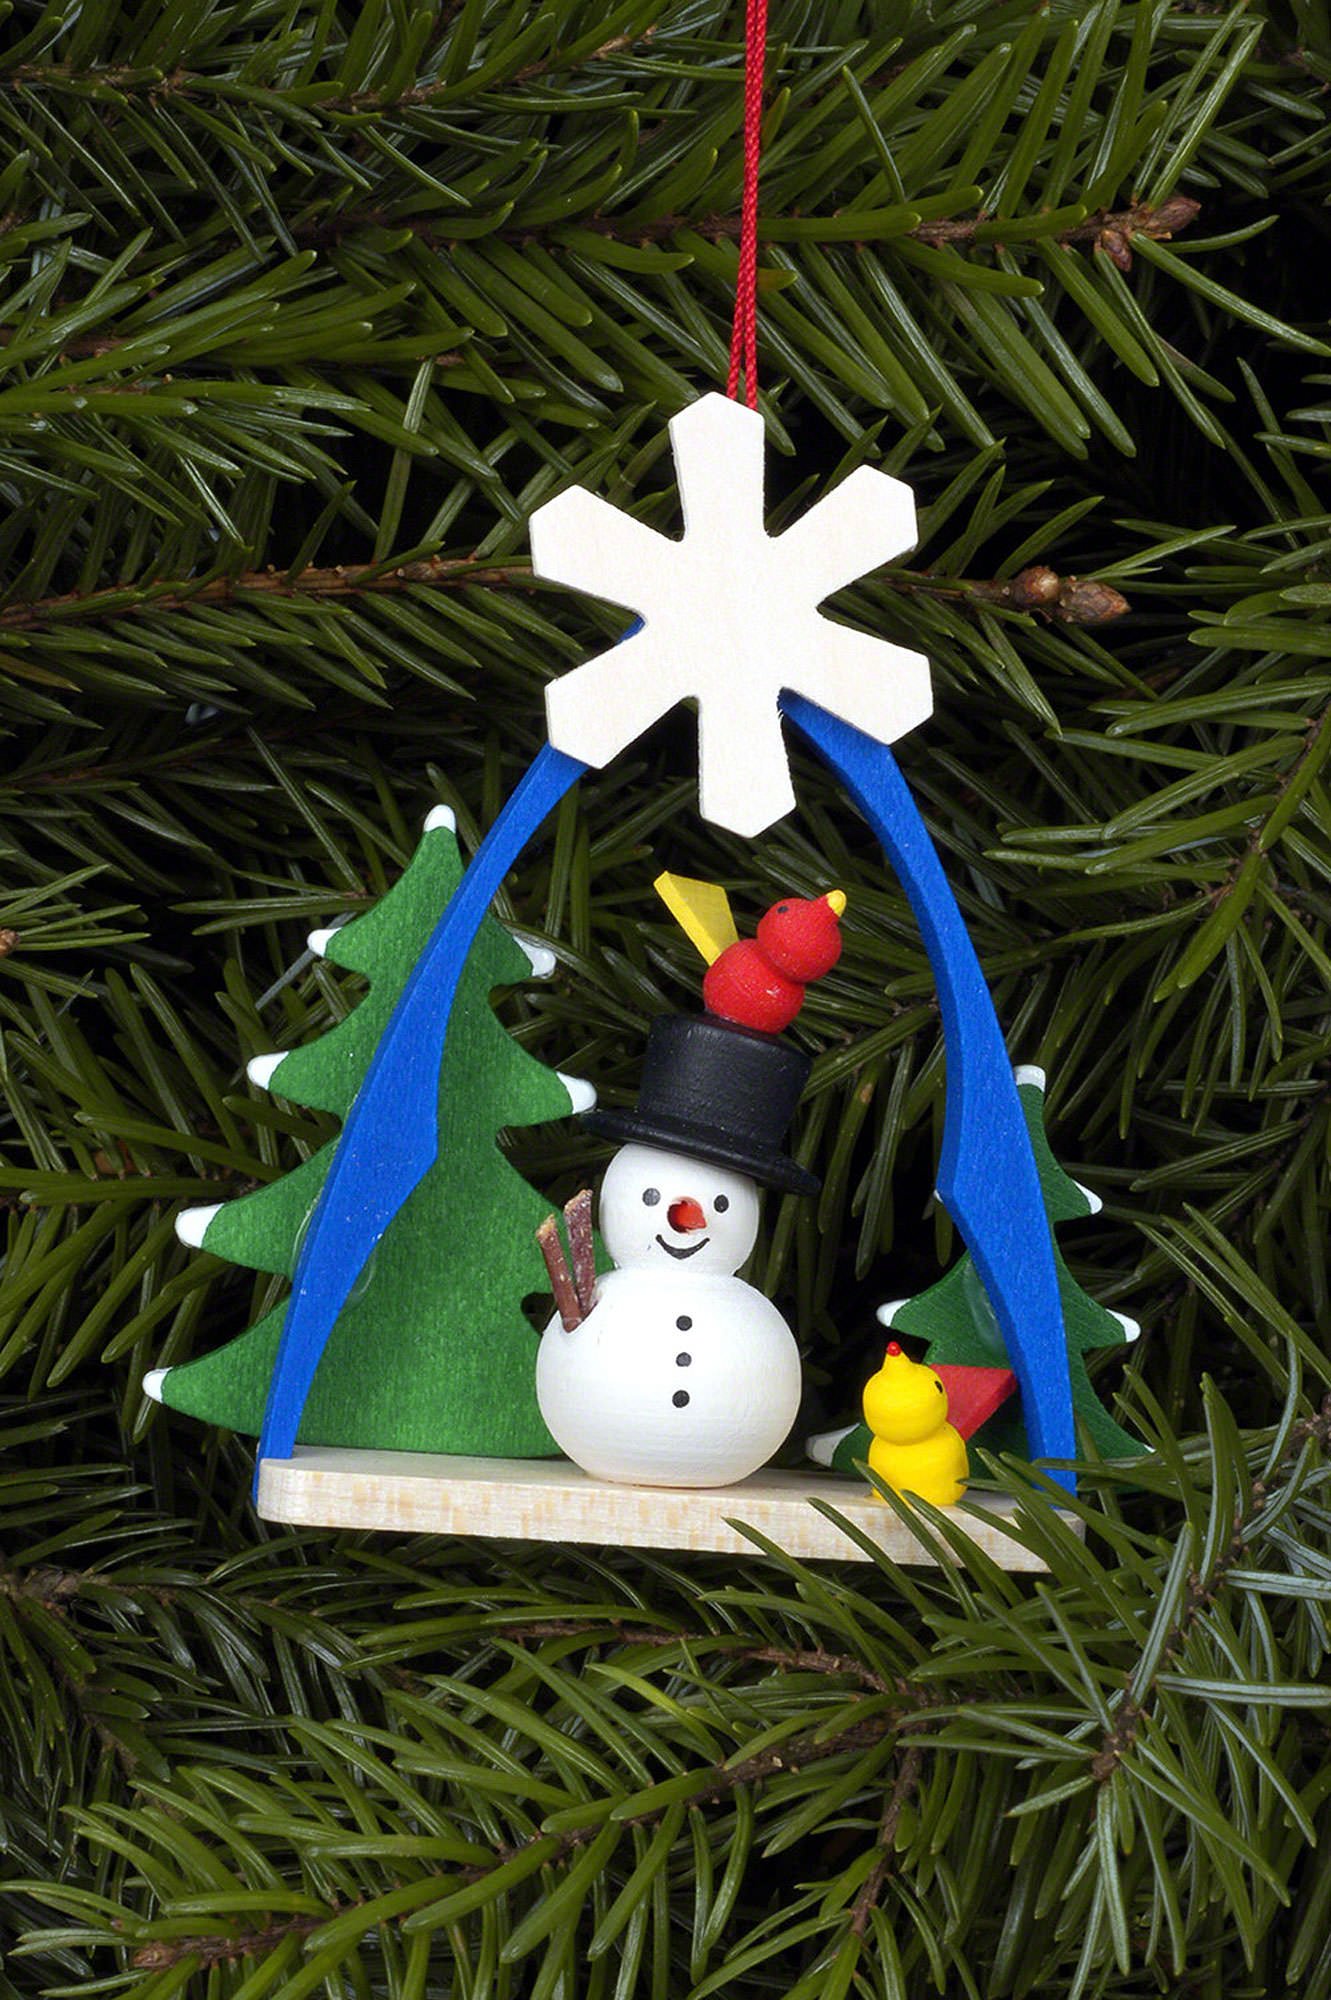 Tree Ornament - Snowman (7,4×6,3 cm/3×2in) by Christian Ulbricht